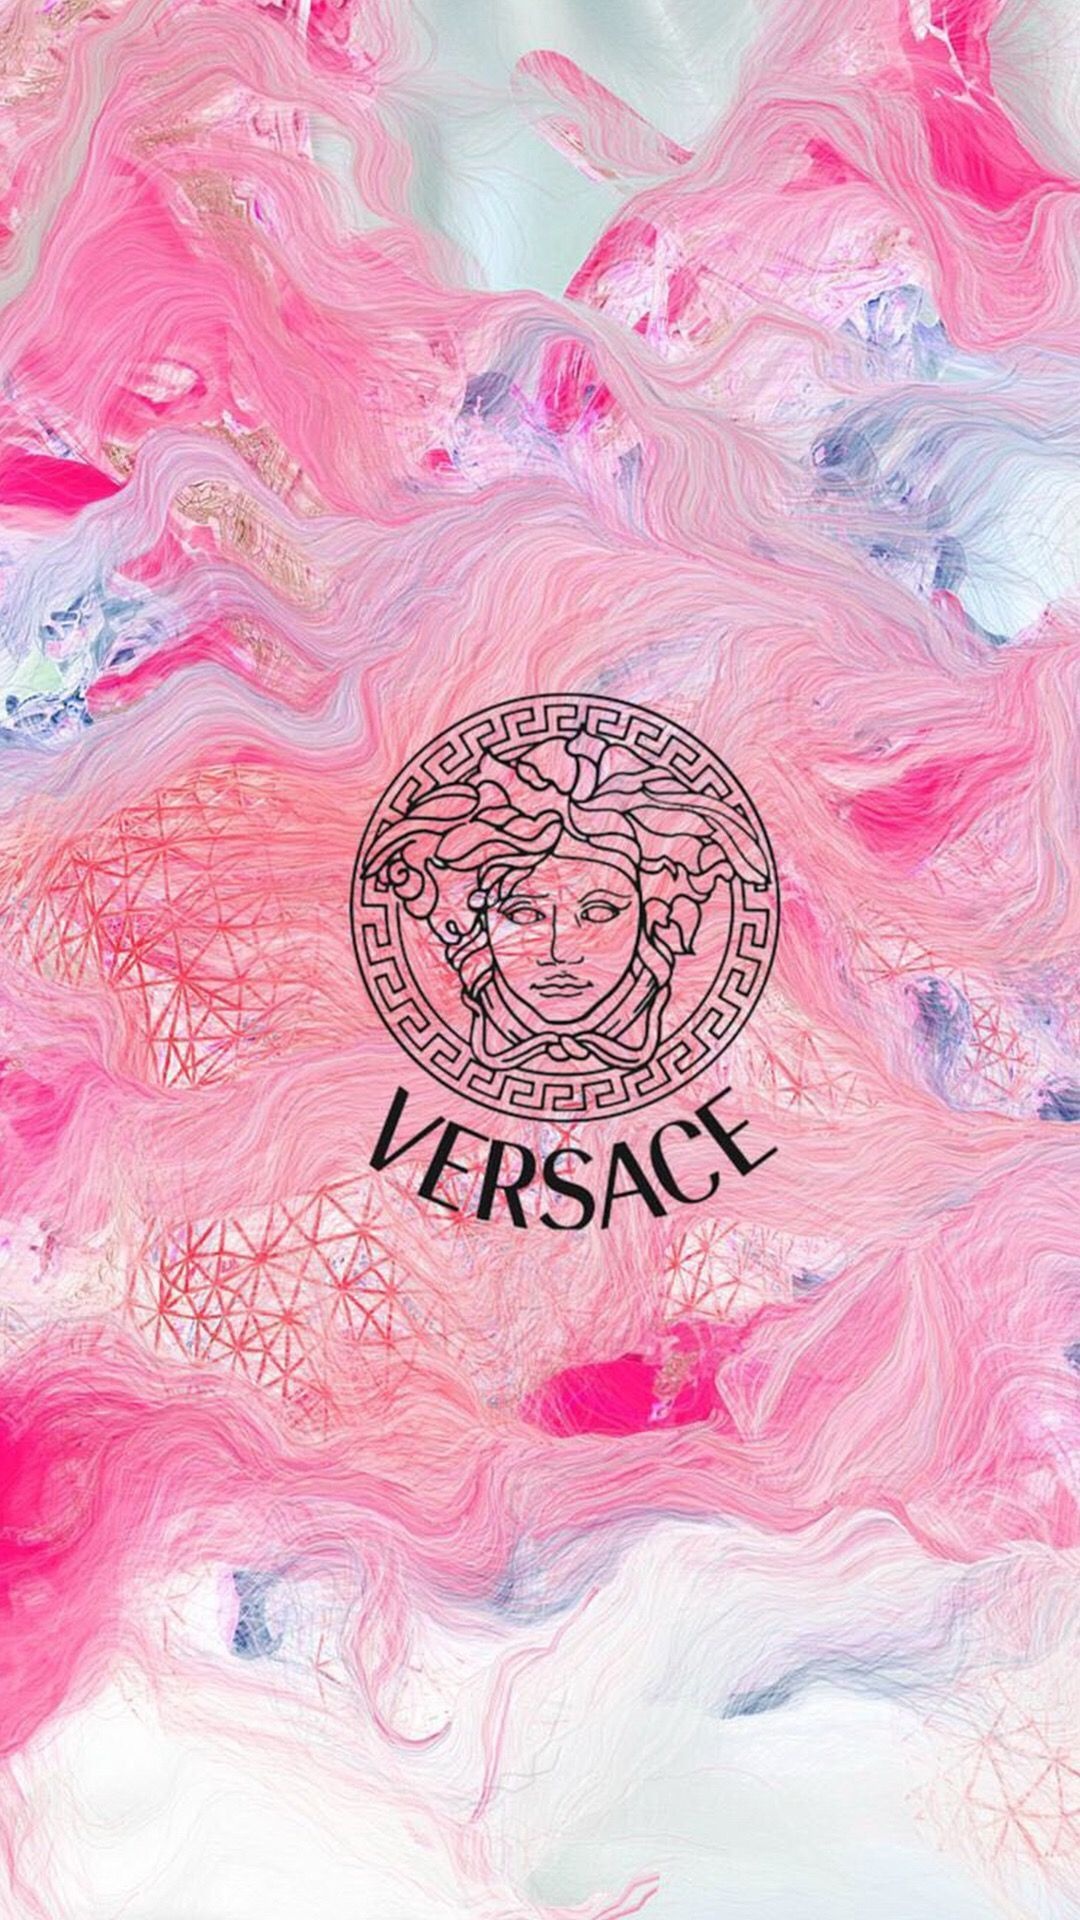 Fashion: Versace, Founded by Gianni Versace in 1978, Known for flashy prints. 1080x1920 Full HD Background.